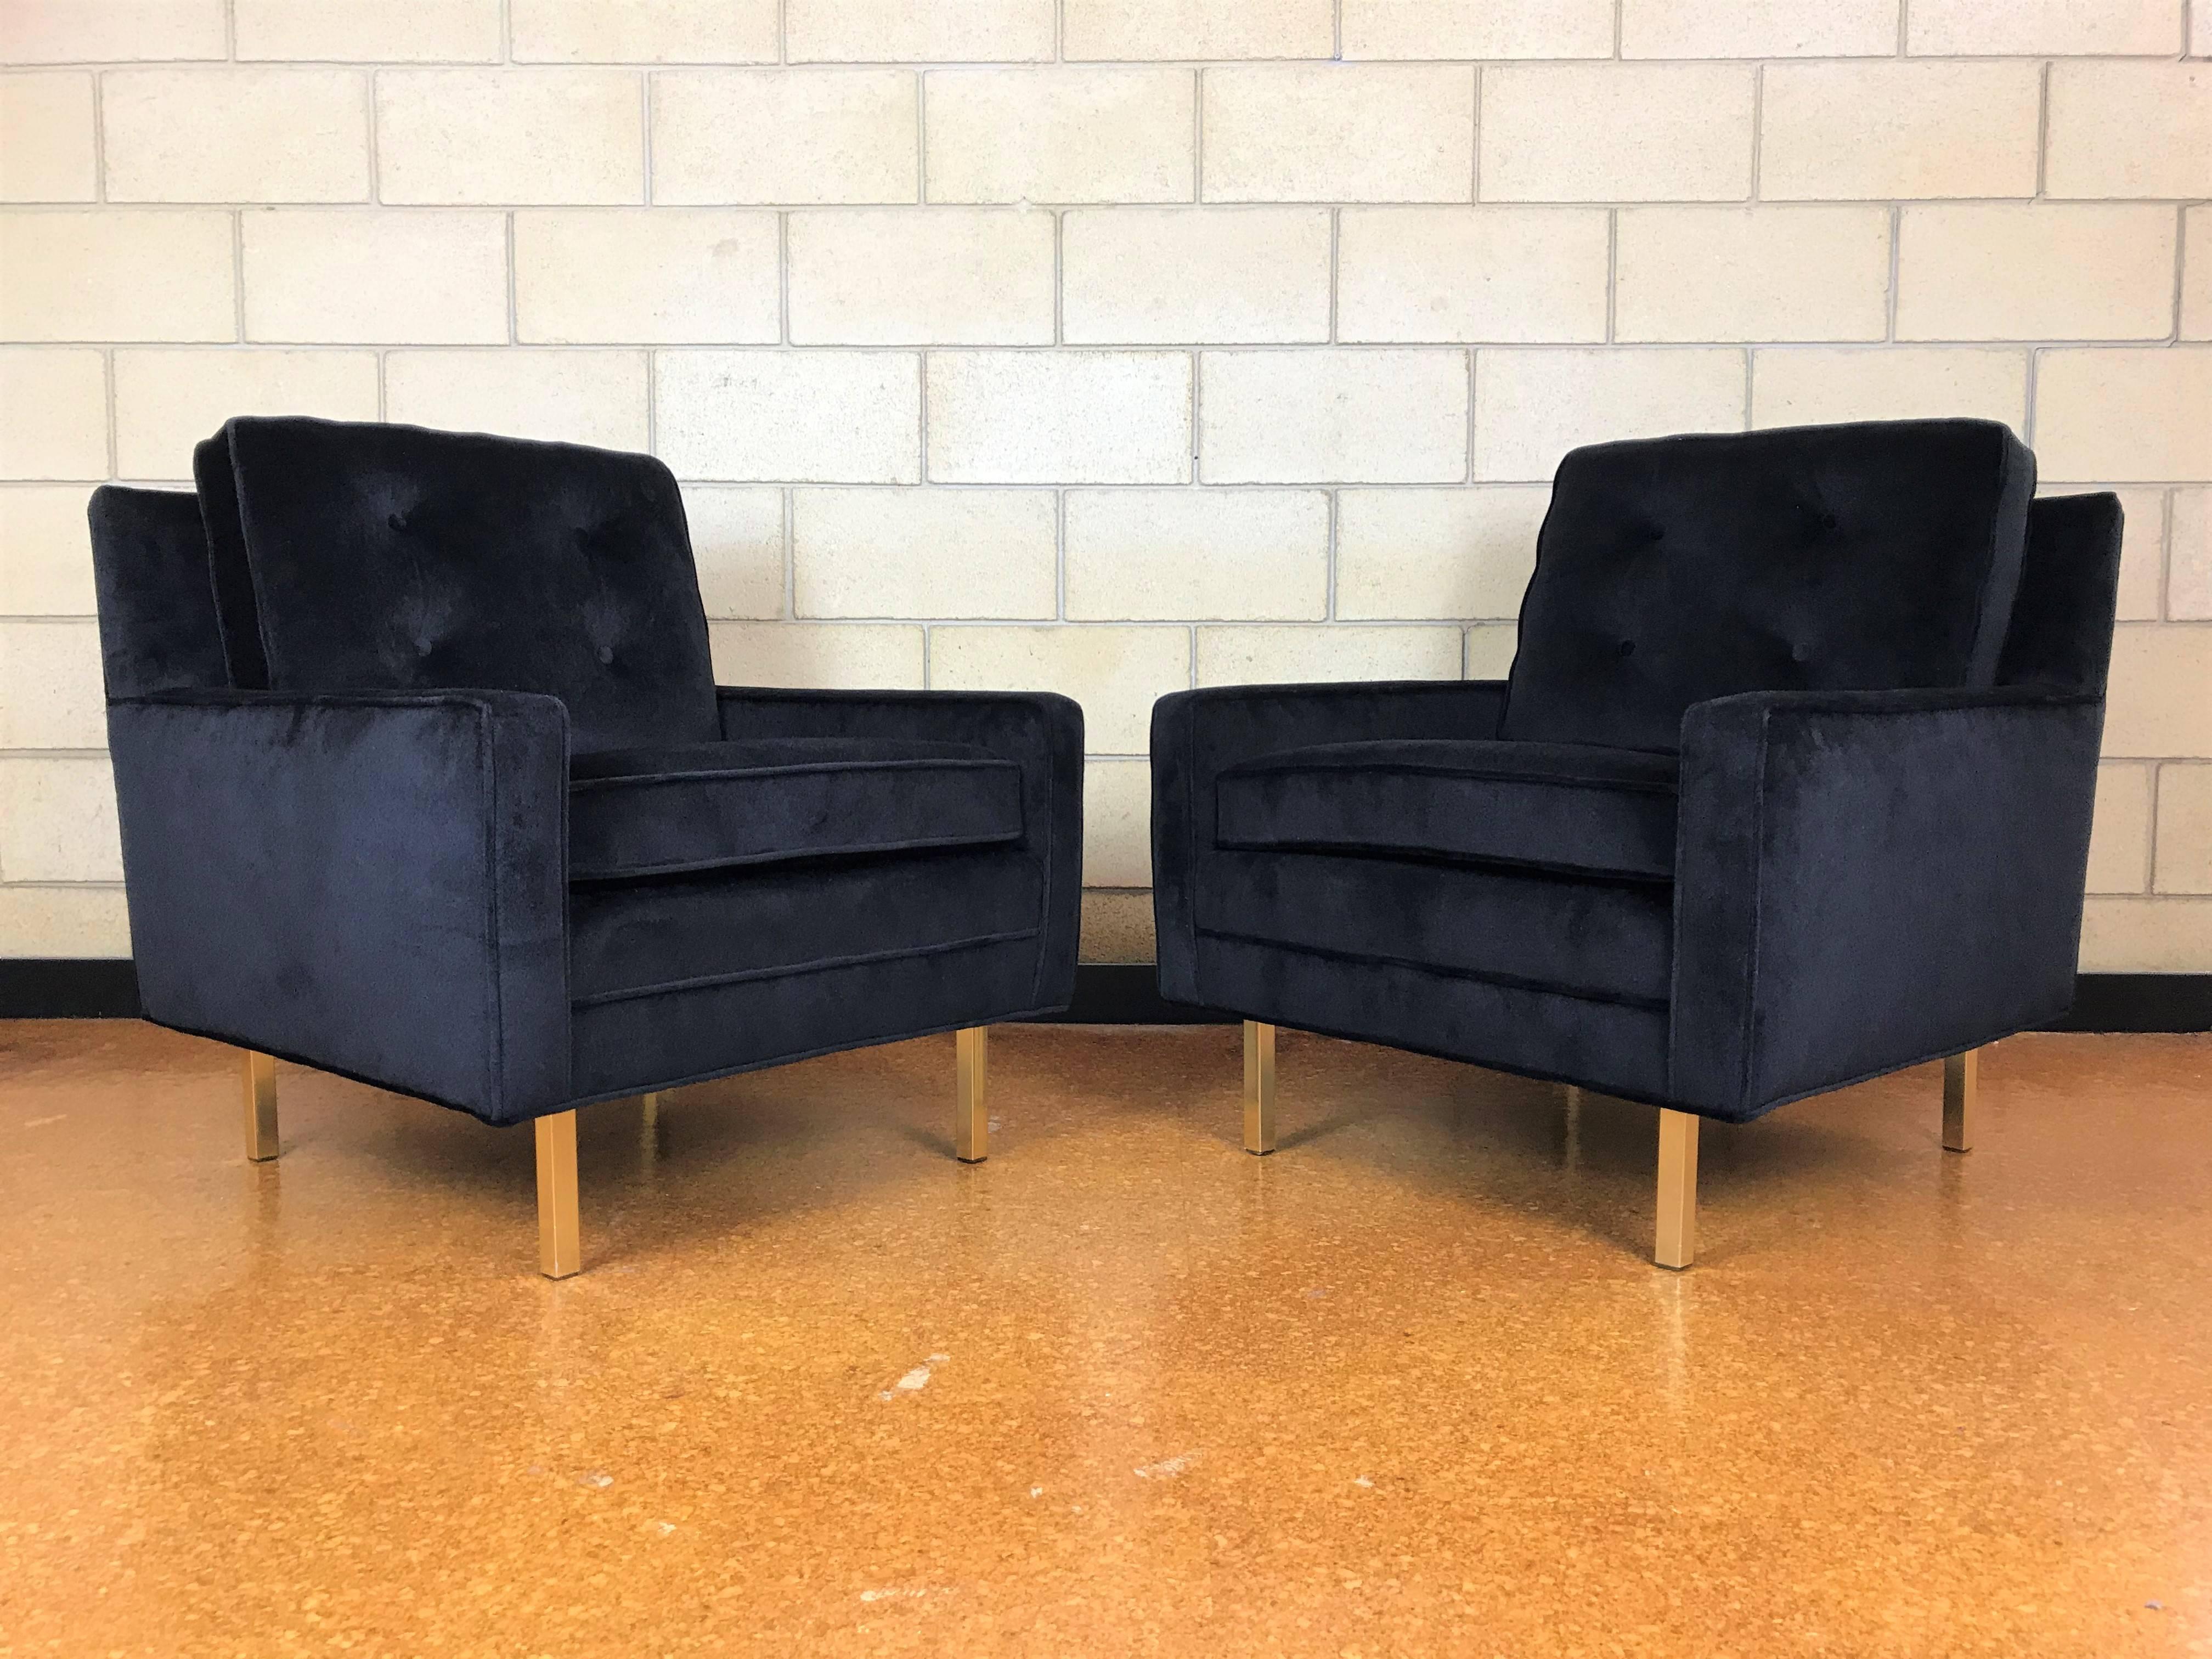 Wonderful pair of tuxedo club lounge chairs from the 1960s, maker unknown, but thought to be made by Selig based upon the construction. The brass legs are solid and the upholstery and cushions are new. Black velvet upholstery and high grade